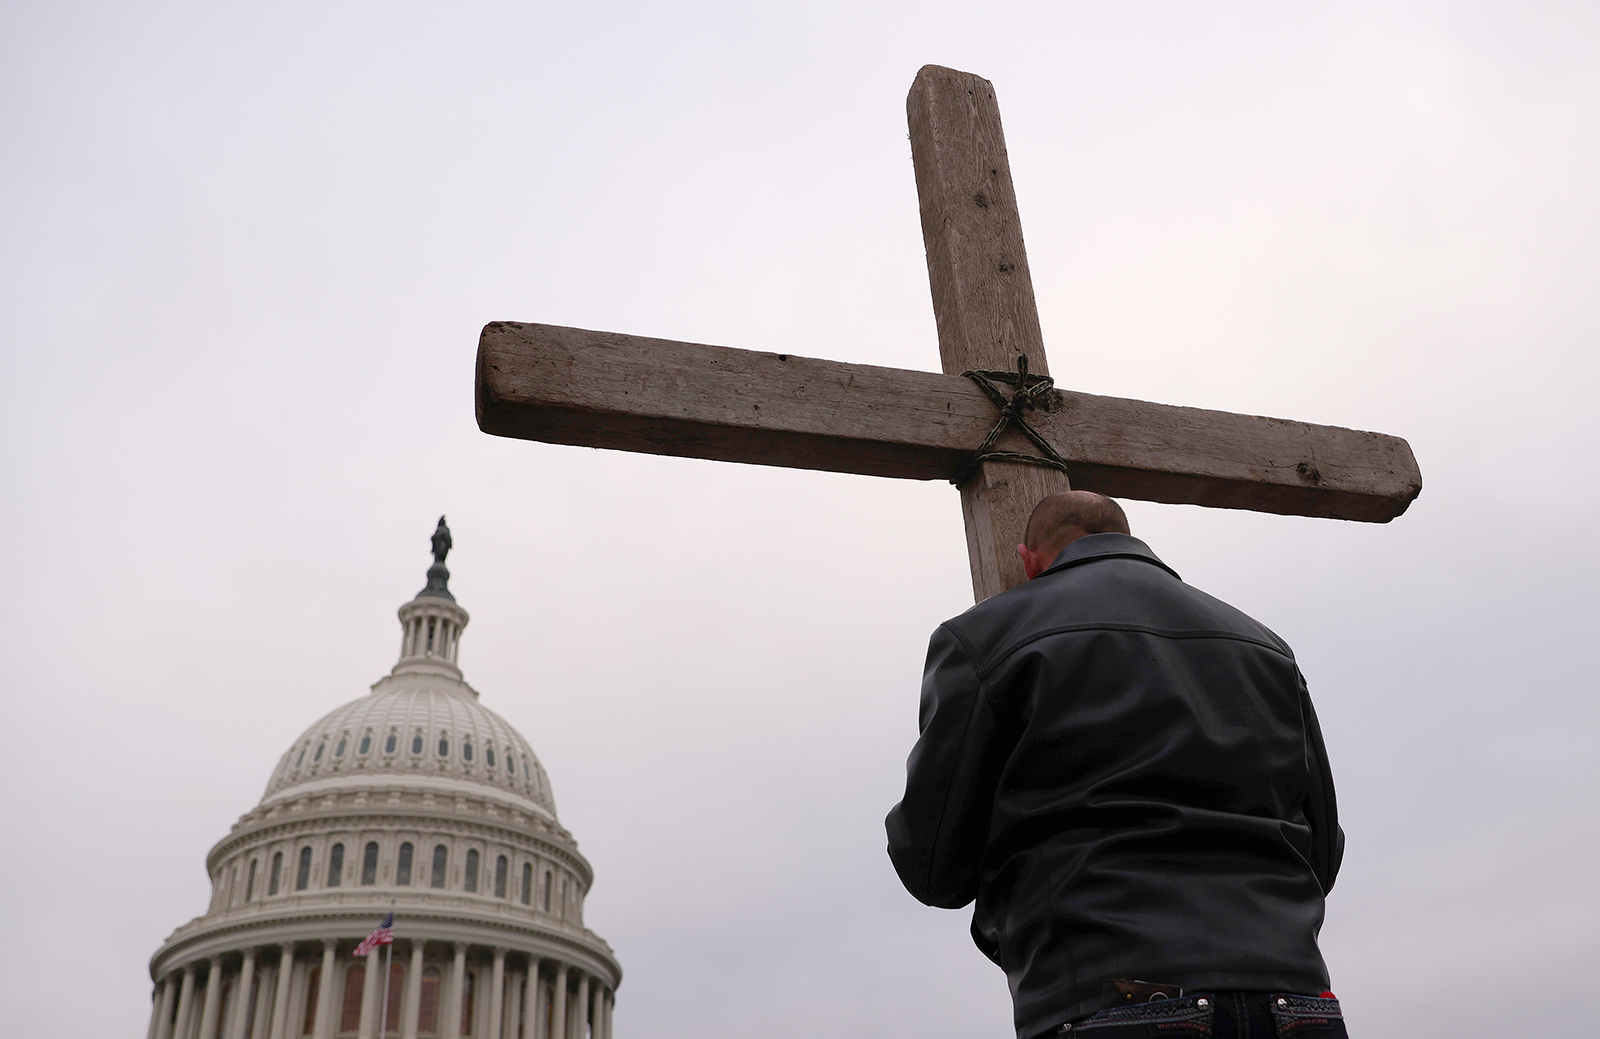 Supporters of U.S. President Donald Trump put up a Cross outside the U.S. Capitol on Jan. 6, 2021. (Photo by Win McNamee/Getty Images)